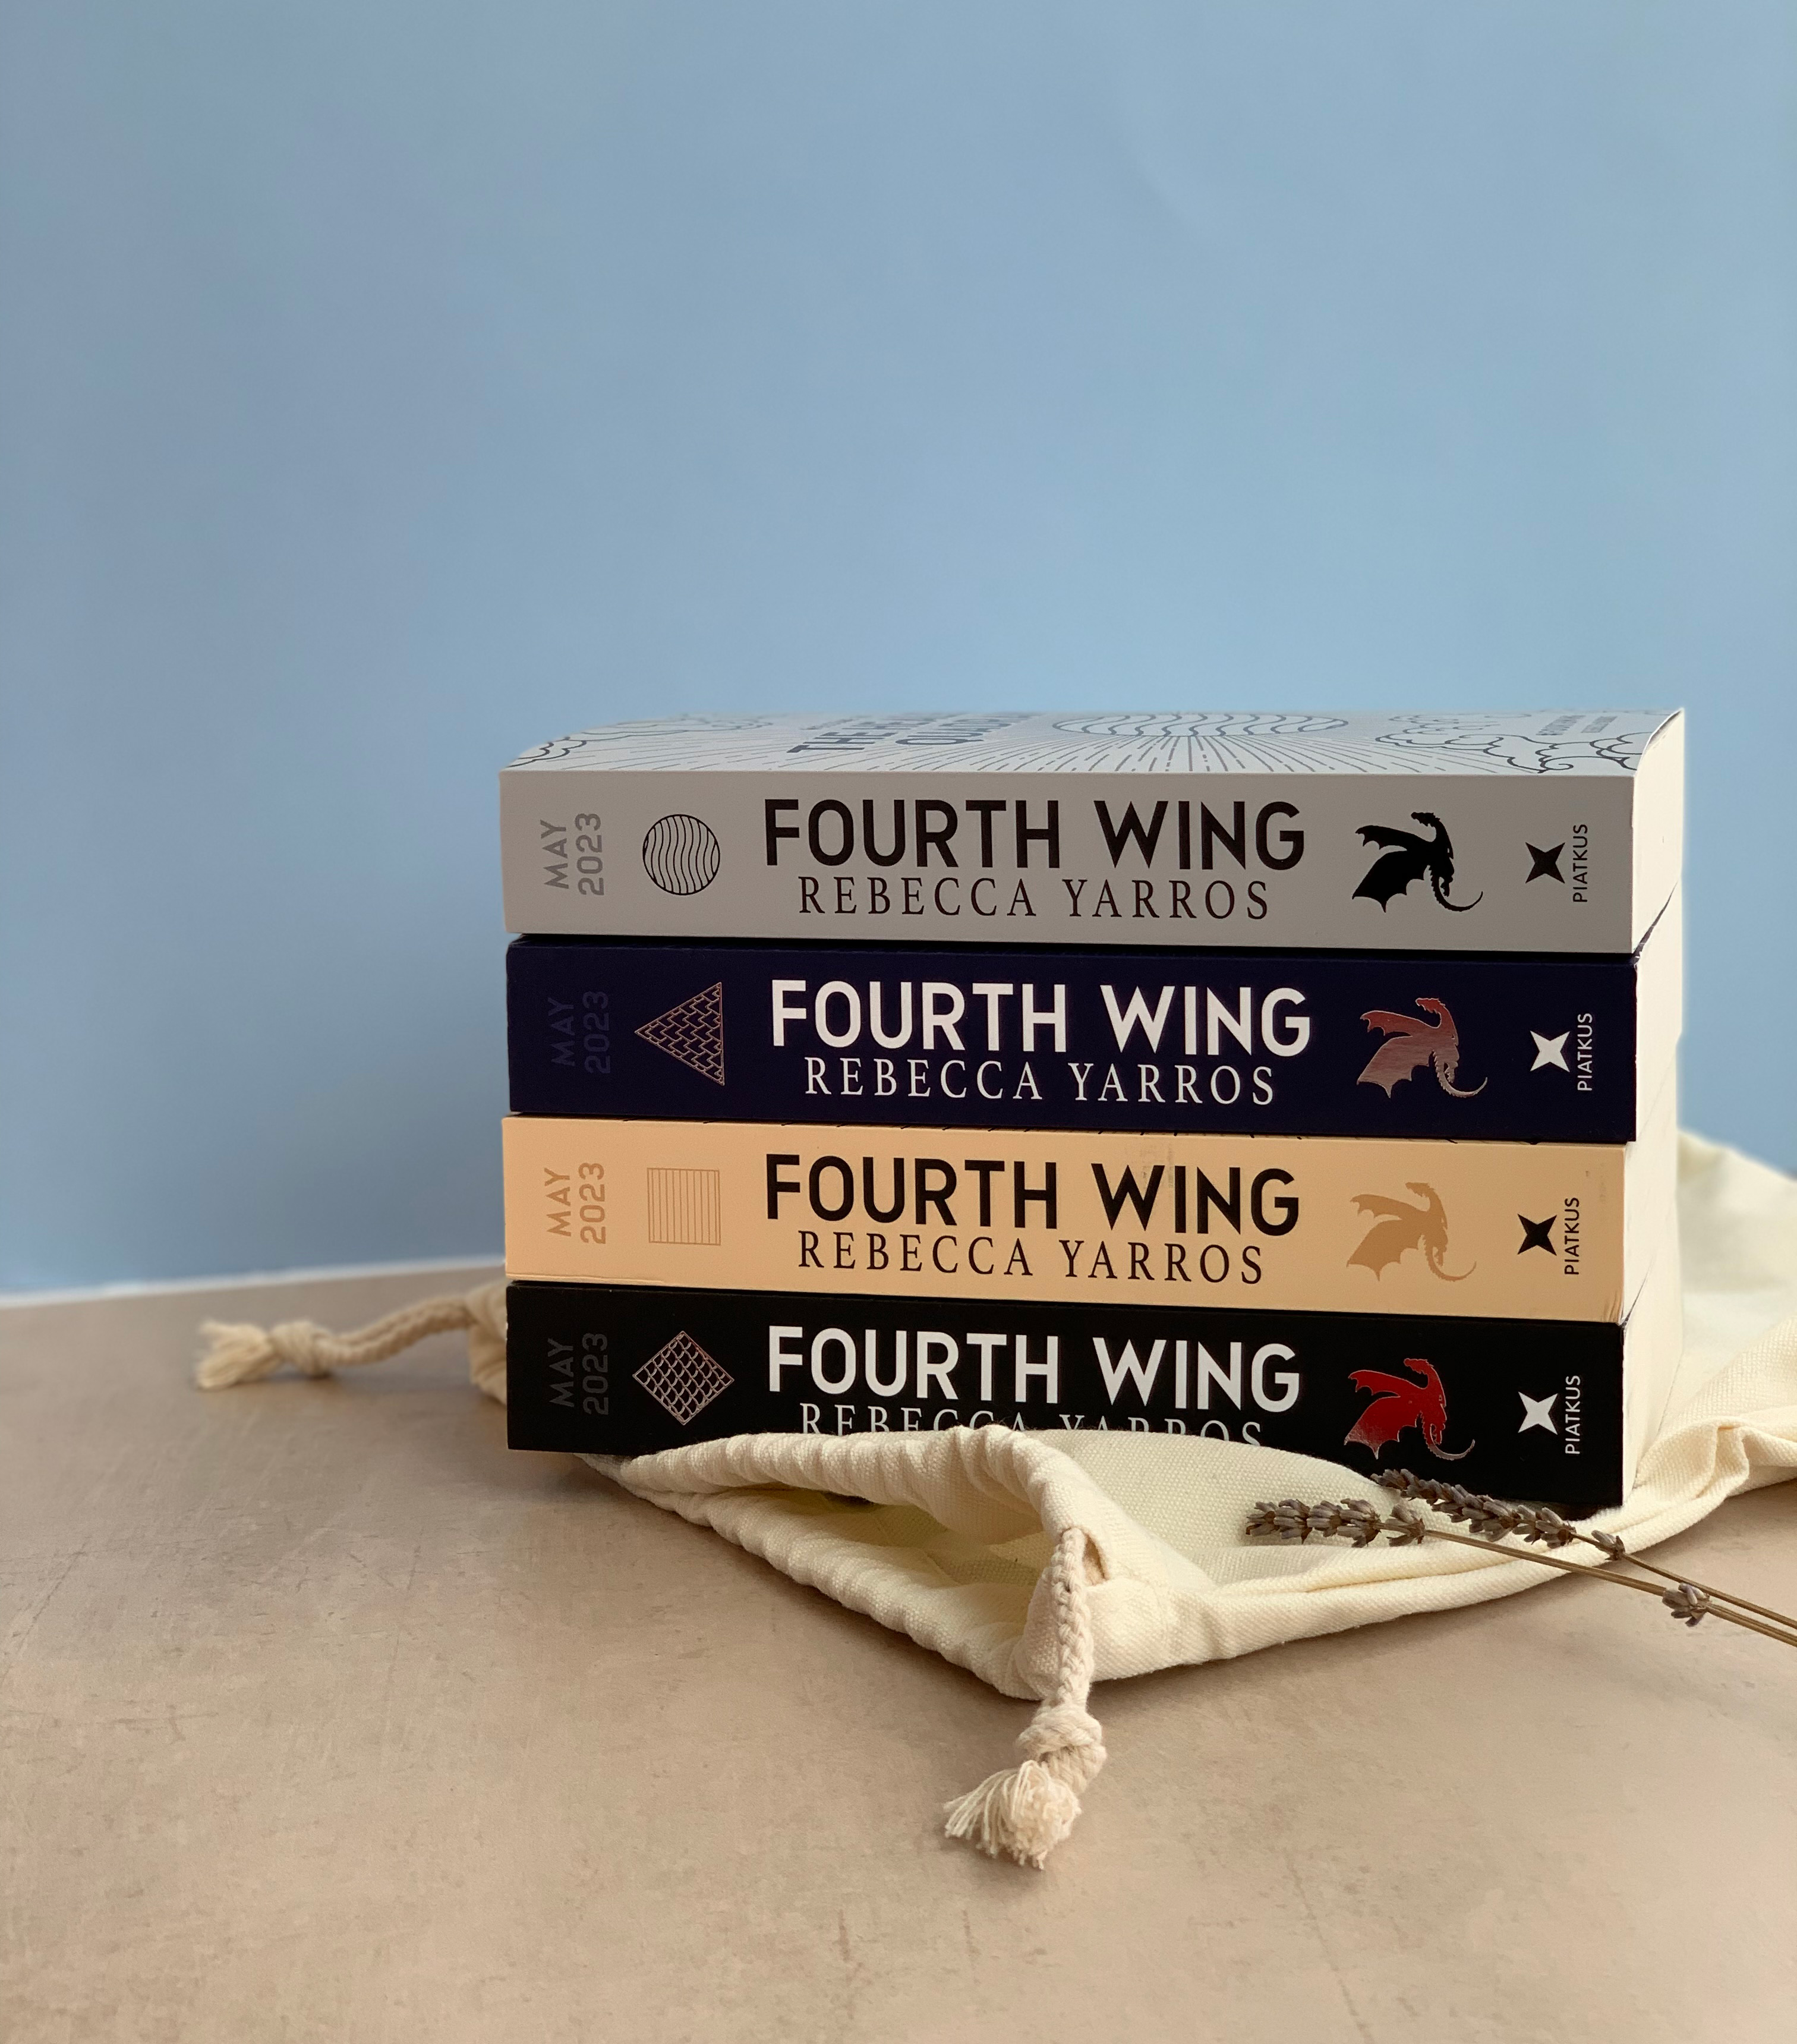 Fourth Wing proof giveaway Hachette UK